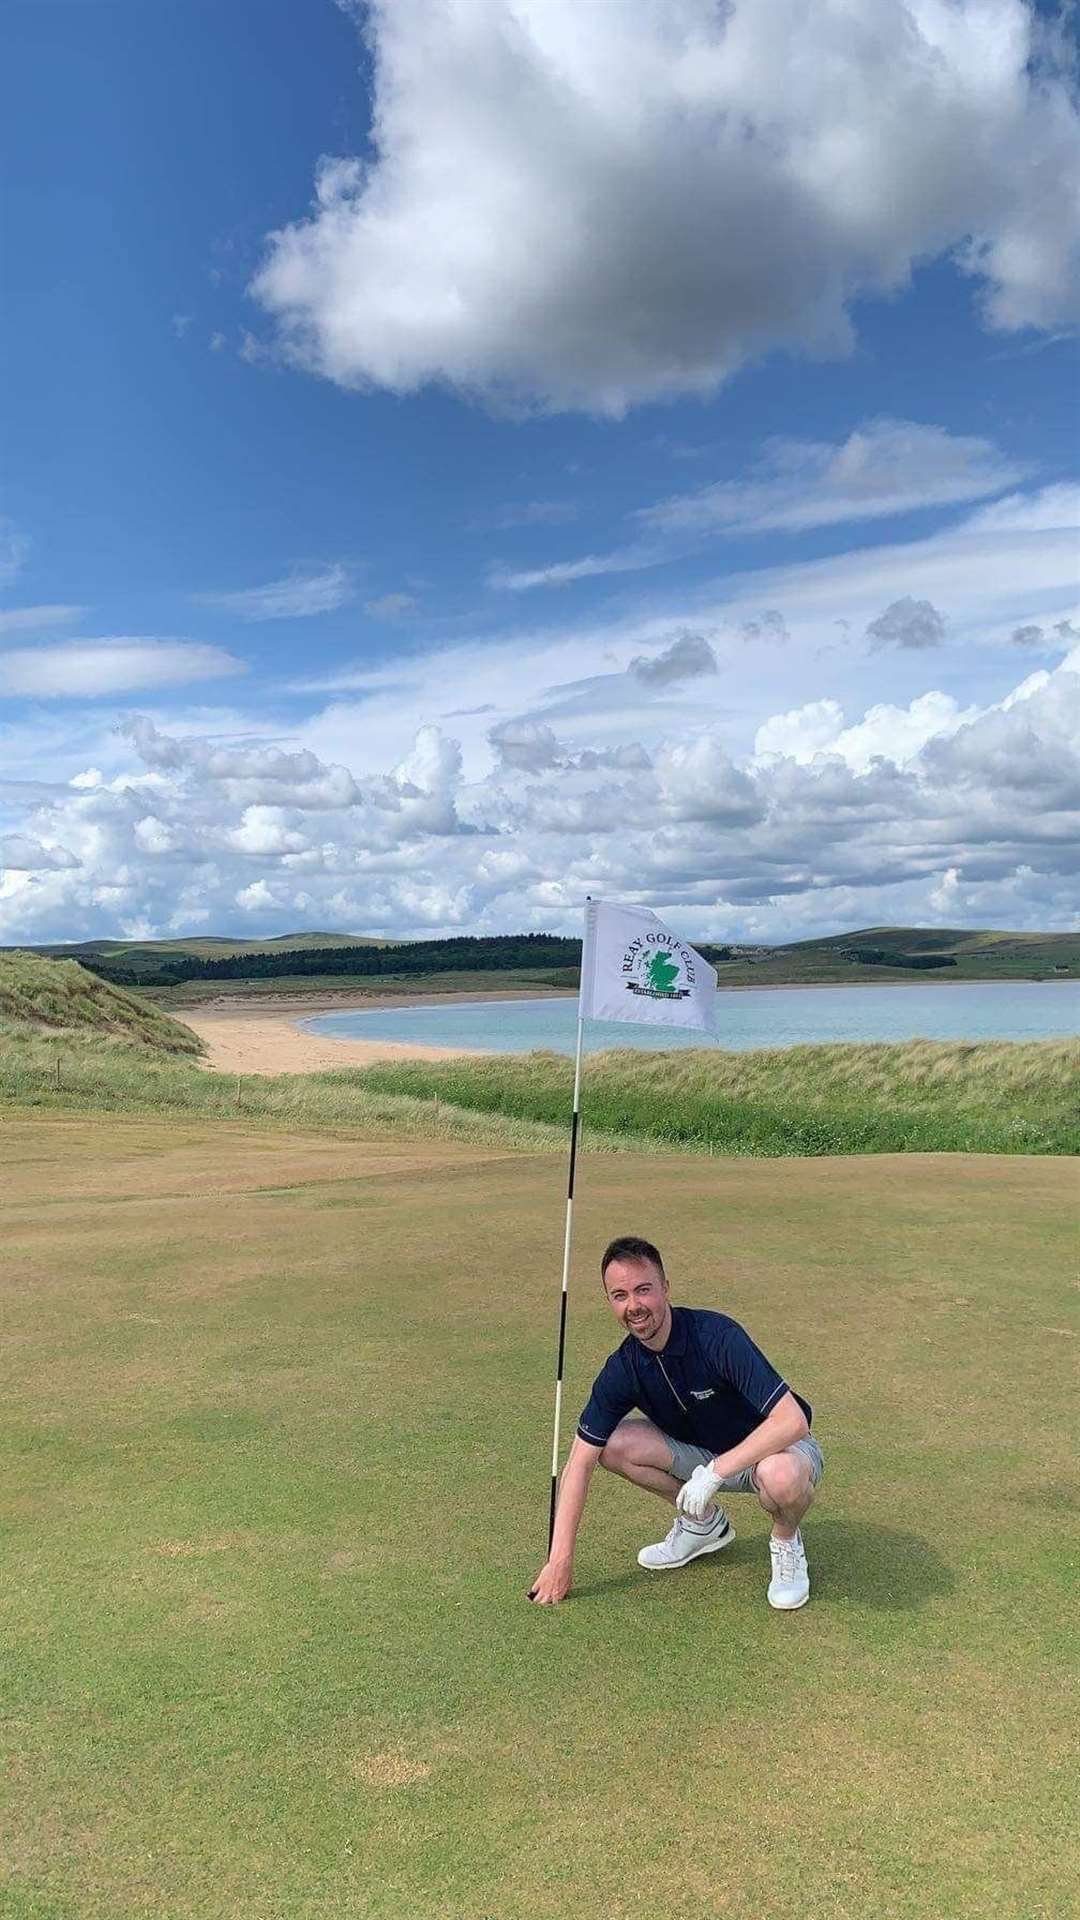 Gregor Munro celebrates his hole in one at the 9th hole on his way to a round of 70 which helped him to secure the overall scratch prize in the Strokeplay Championship.